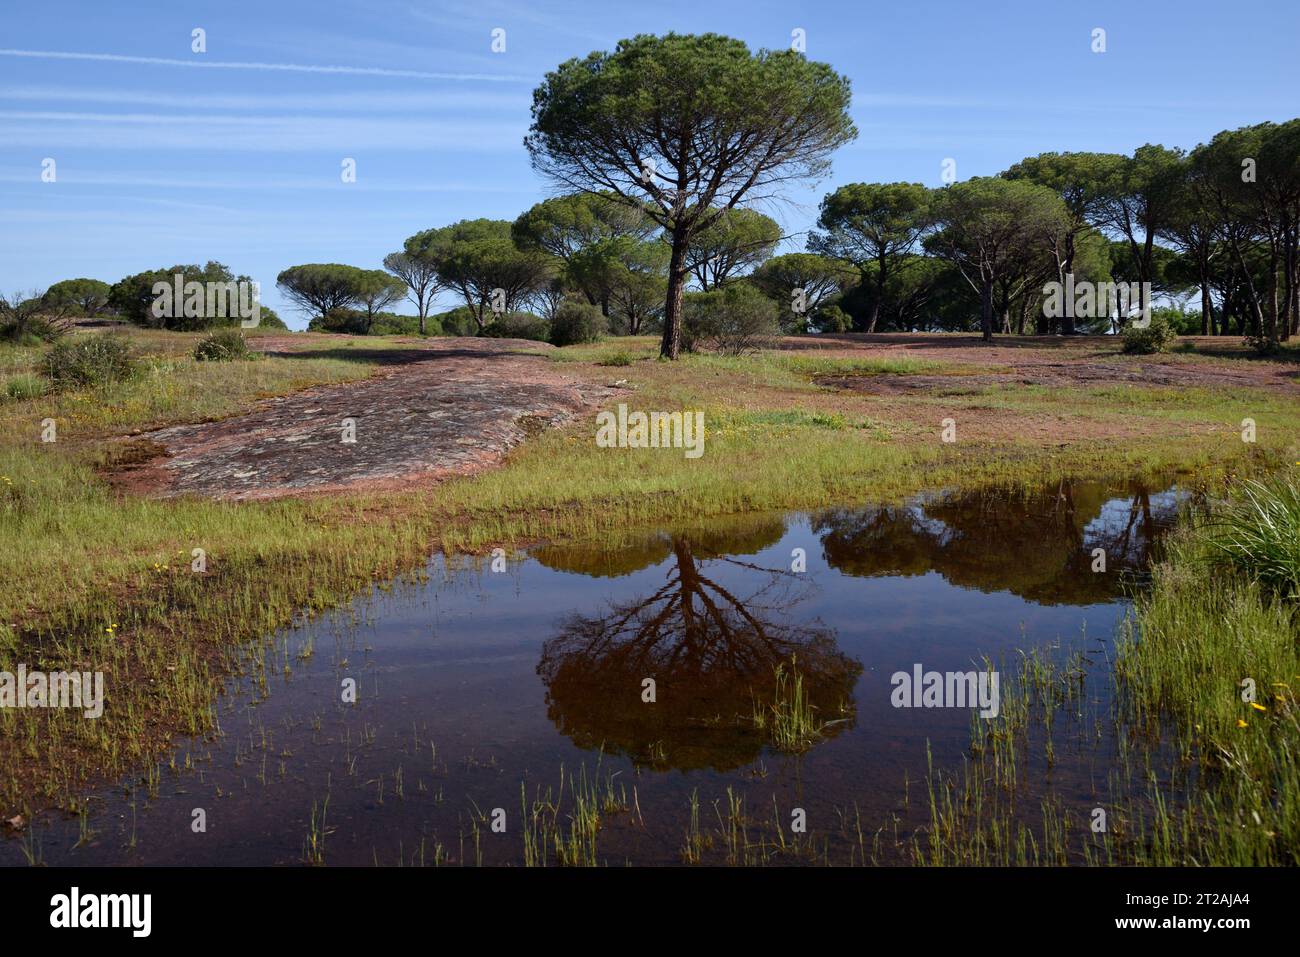 Stone Pines aka Umbrella Pines Pinus pinea, Reflected in a Pool or Pond on the Plaine des Maures, or Maures Plain, Nature Reserve Var Provence France Stock Photo